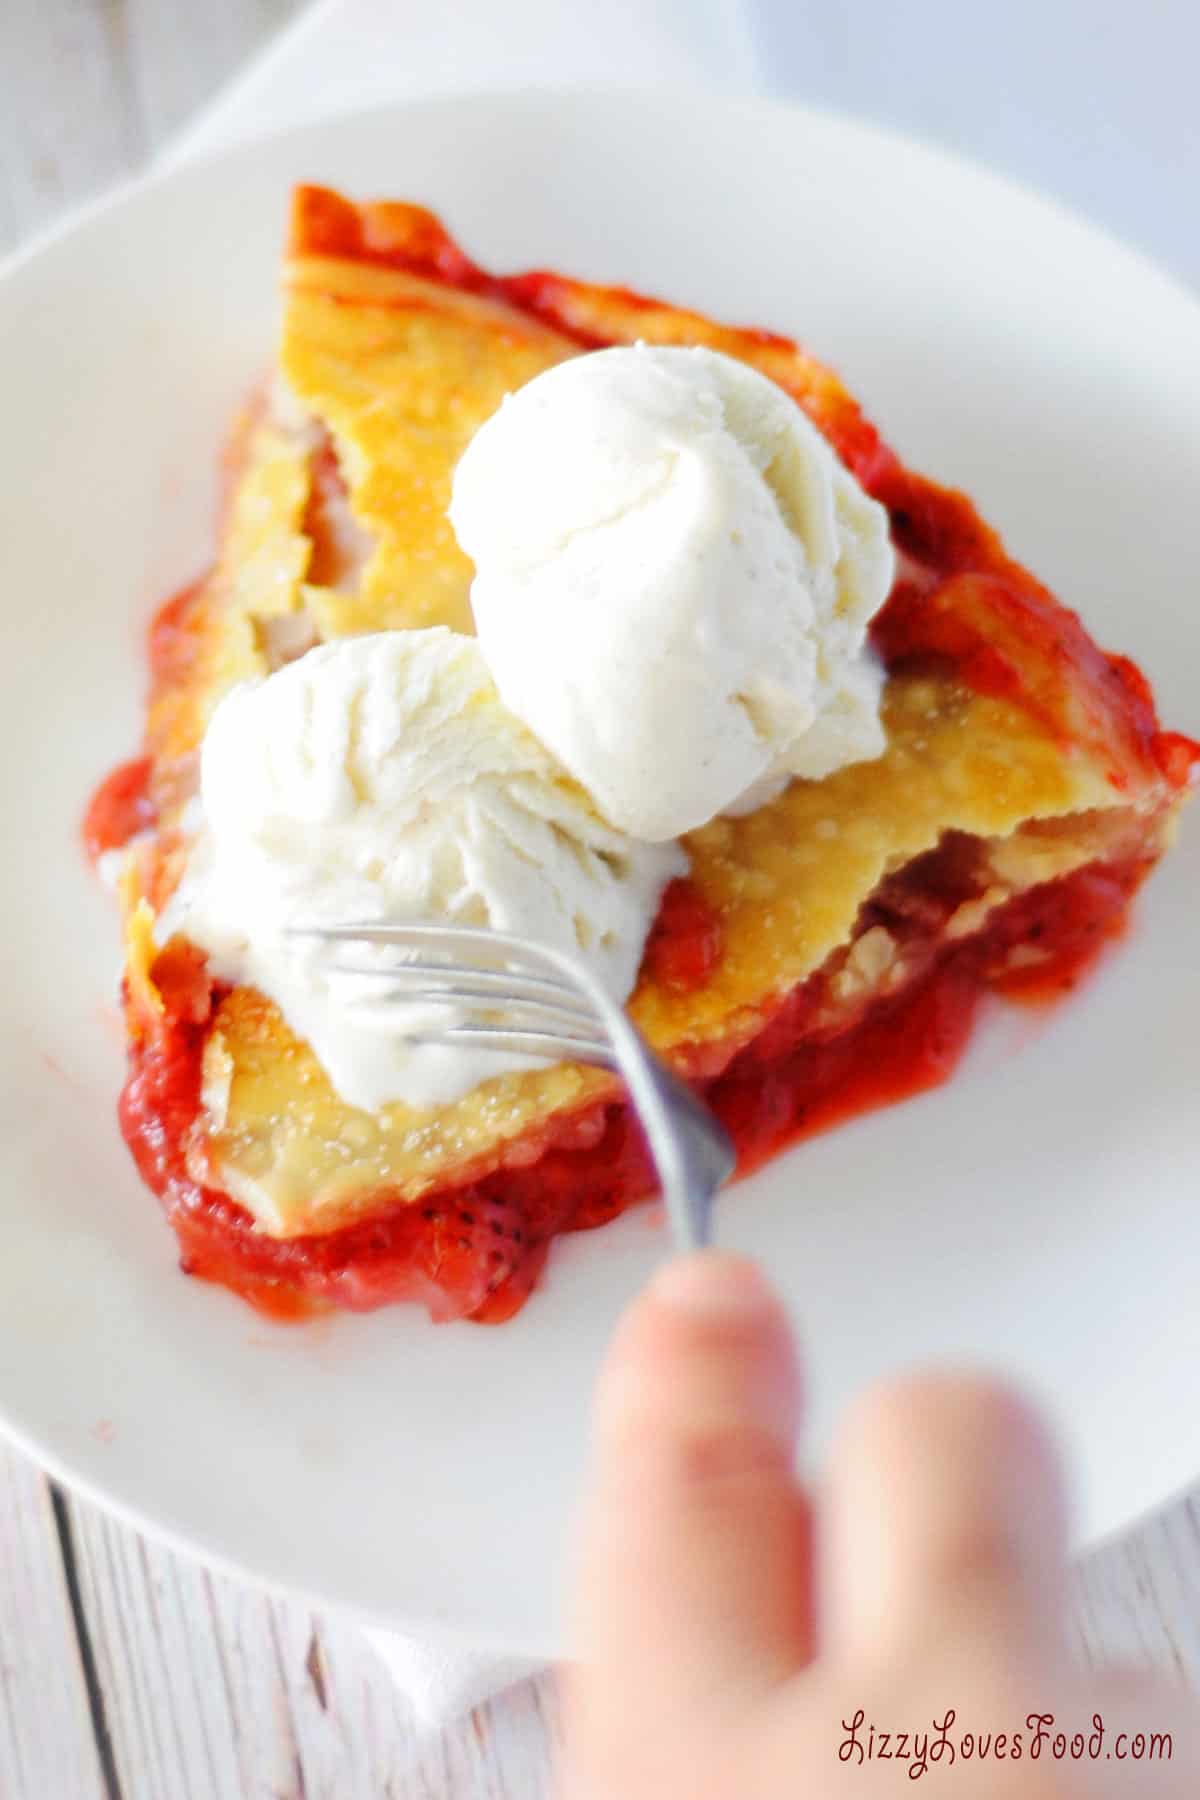 How to Grow the Most Pie-Worthy Rhubarb Ever